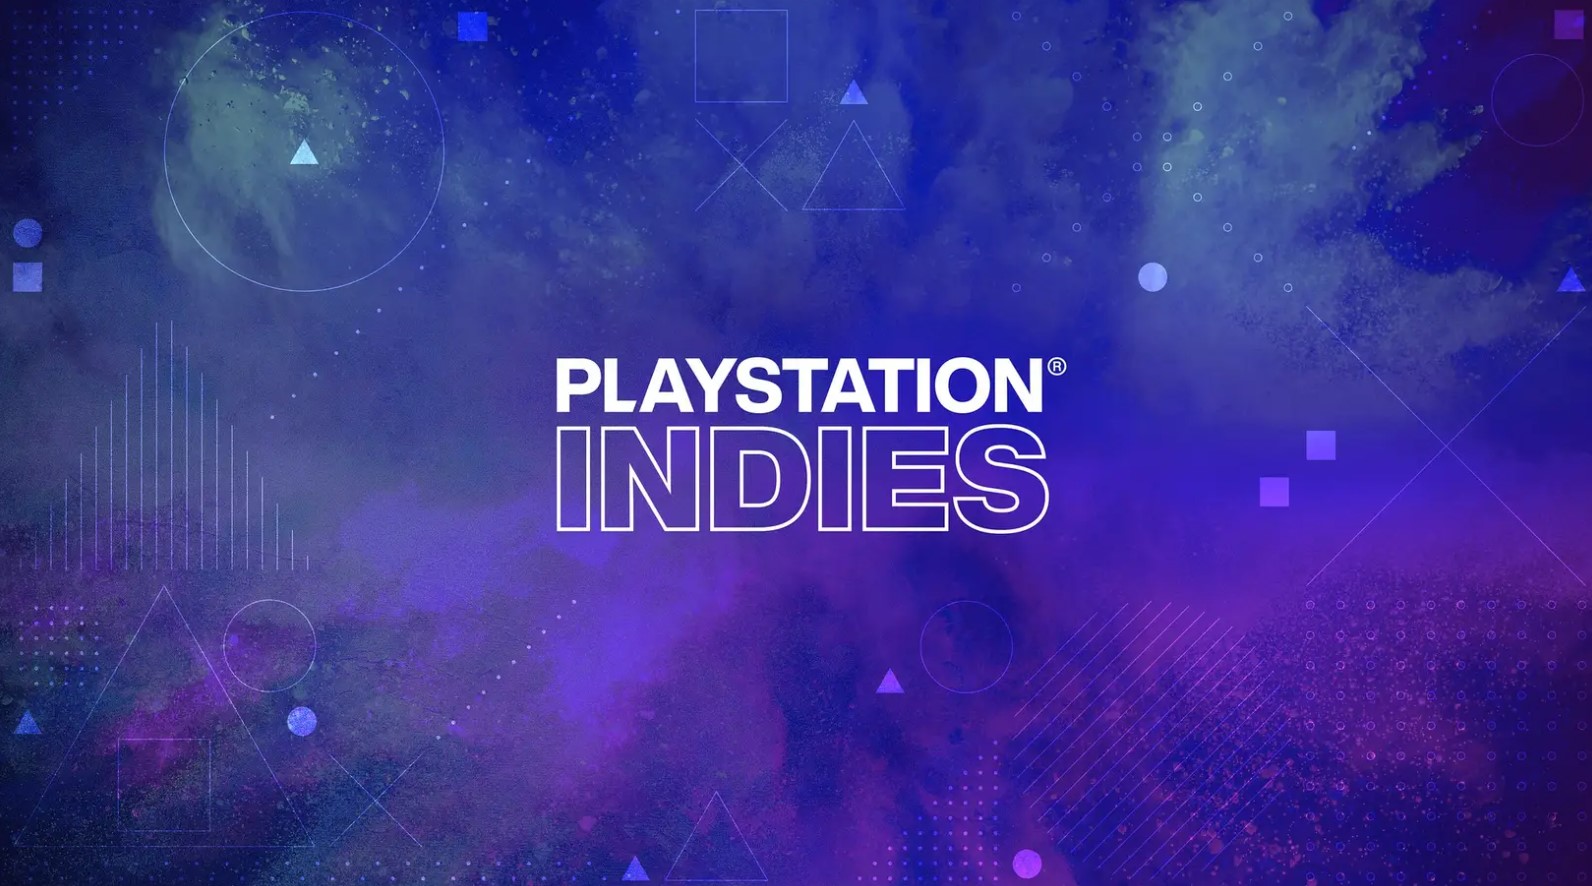 Playstation Indies - Sony